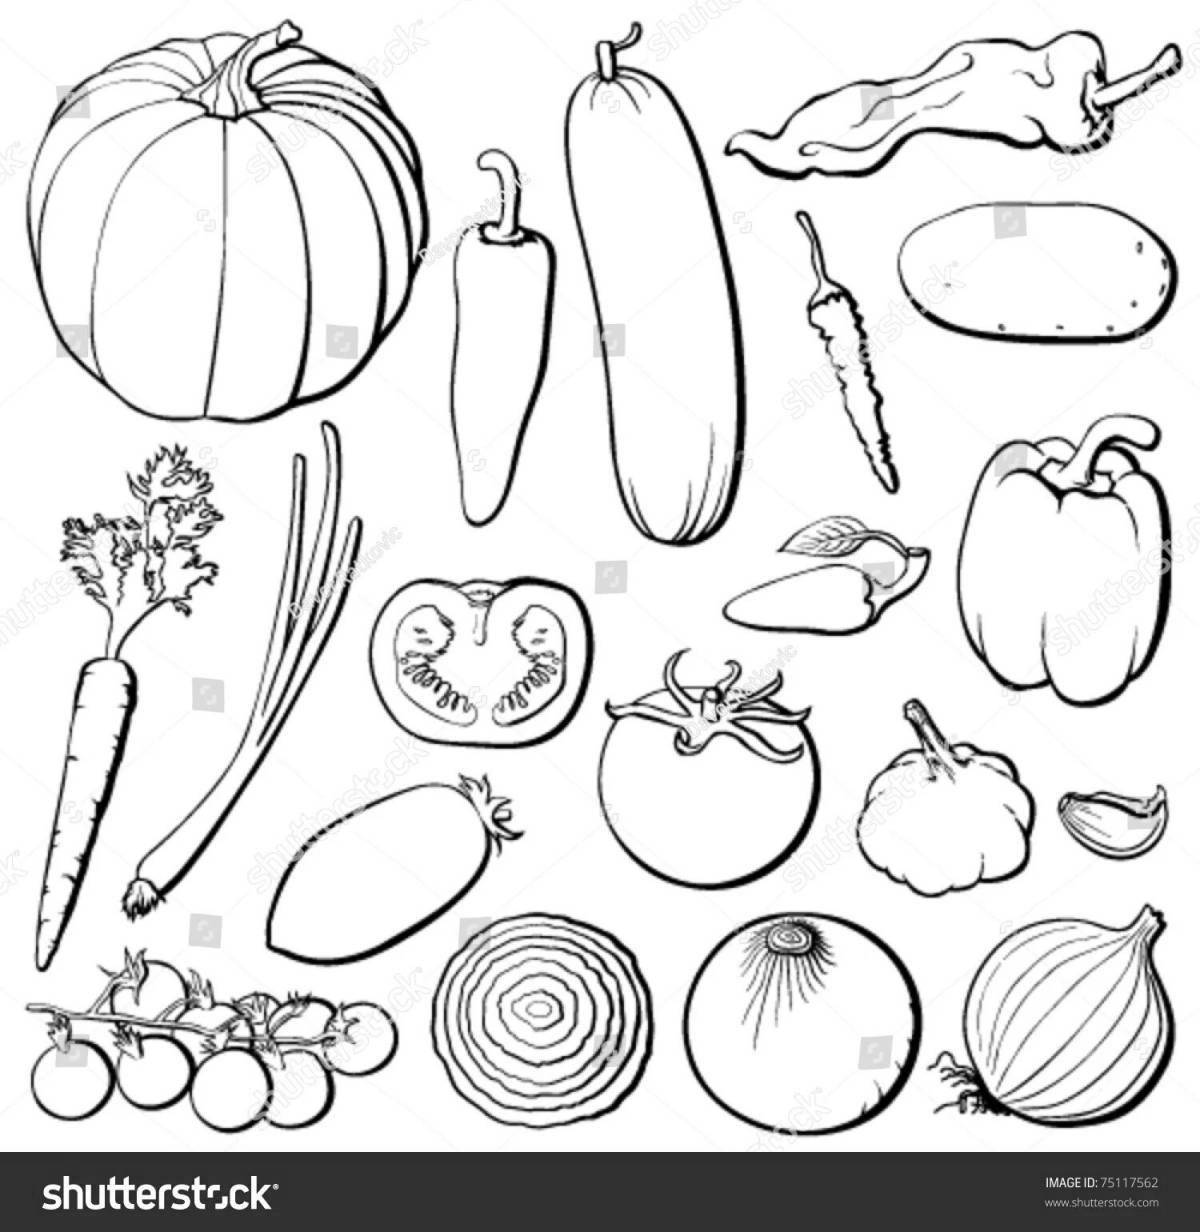 Cute vegetable coloring page with vinaigrette